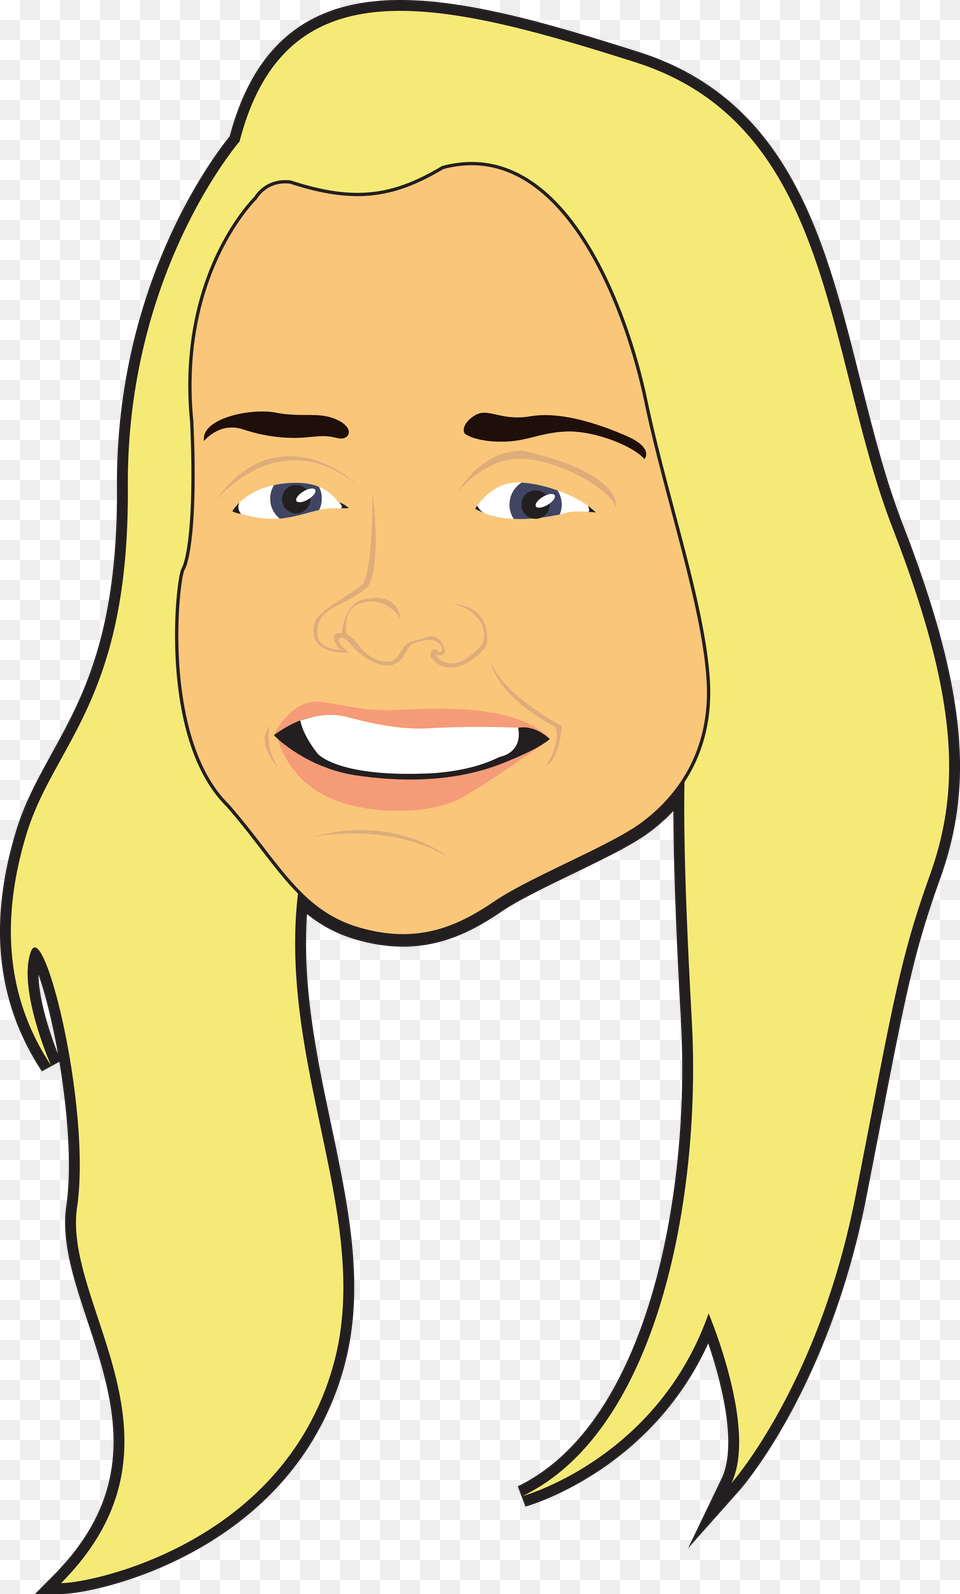 Briana Hornung Ticket Sales Manager Cartoon, Plant, Fruit, Food, Produce Png Image